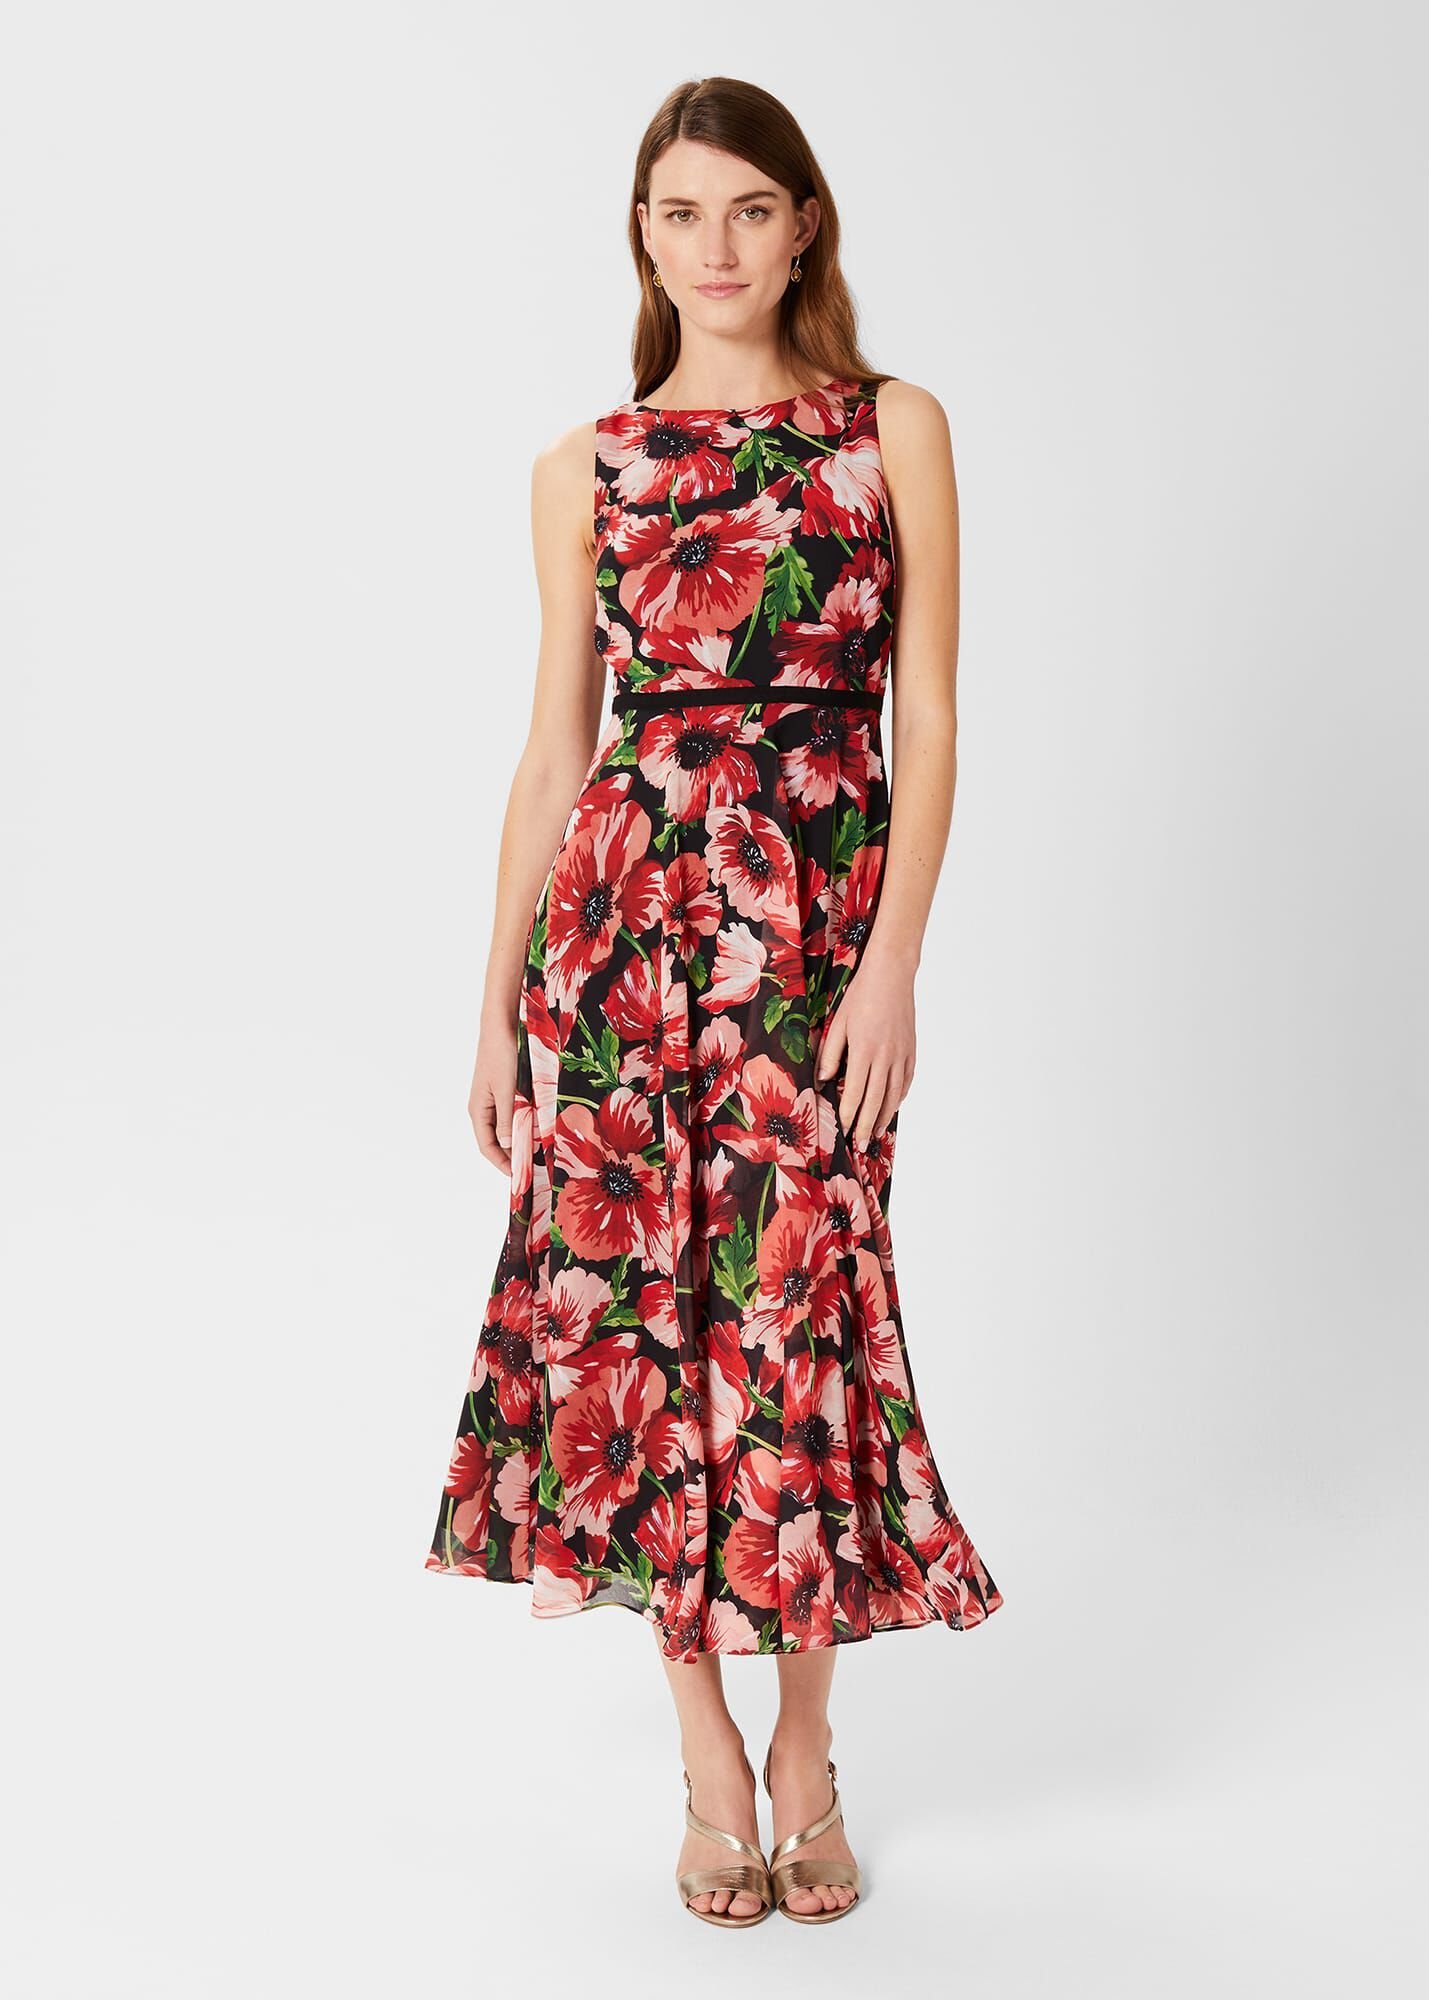 Hobbs London Carly Floral Print Midi Dress Red Multi Recycled Materials Occasionwear